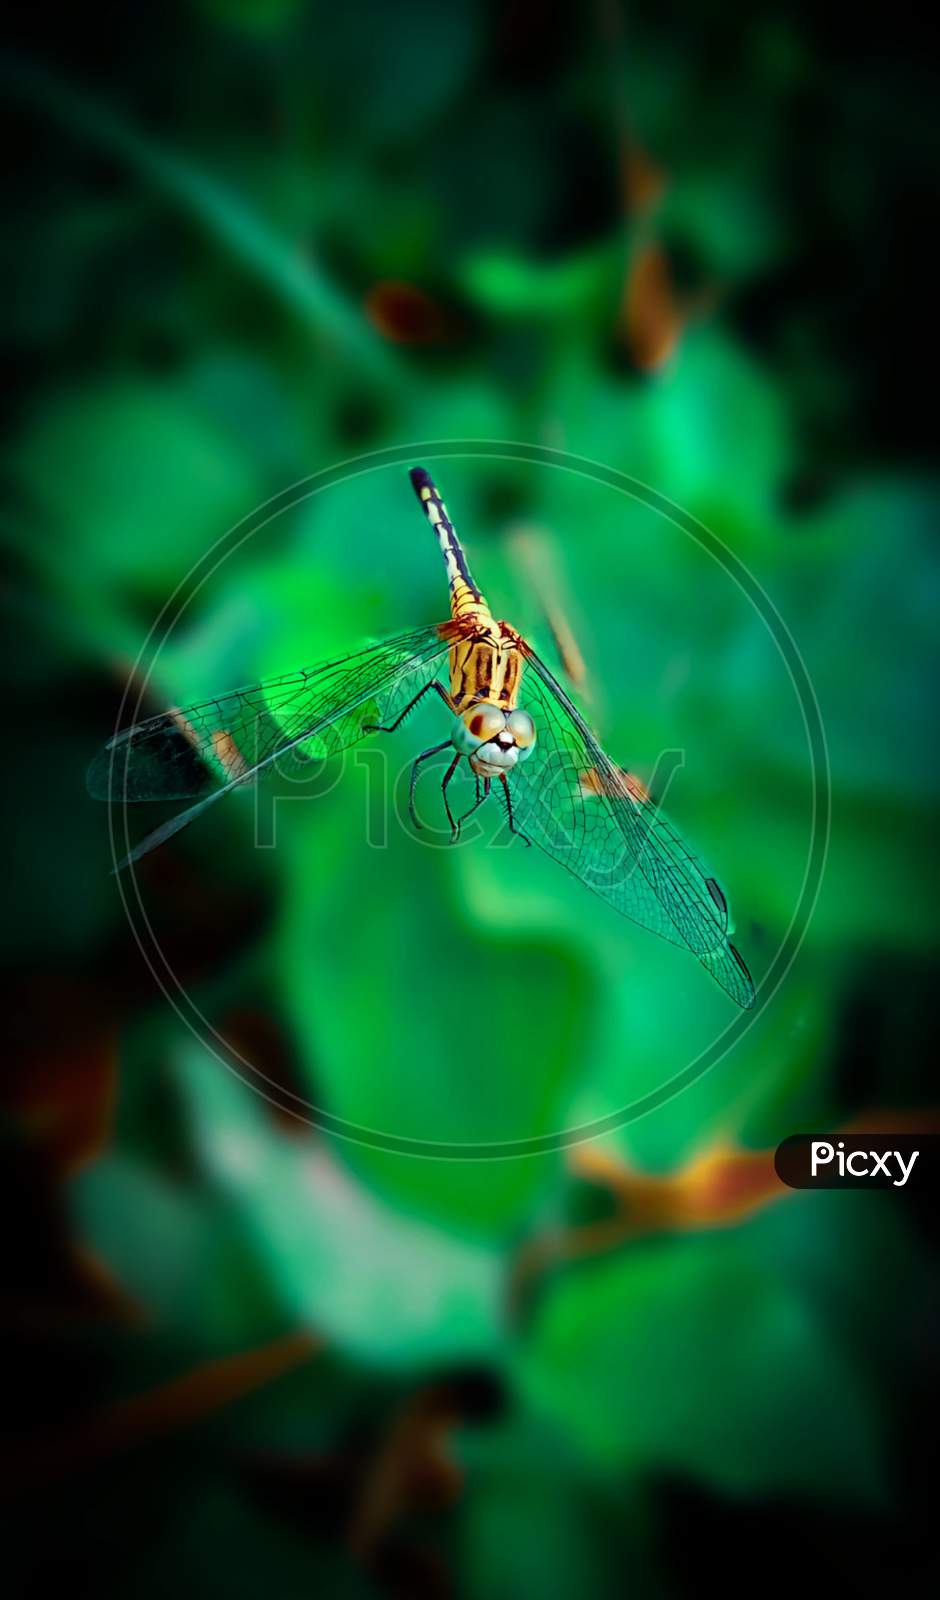 Dragonfly closed pic capture